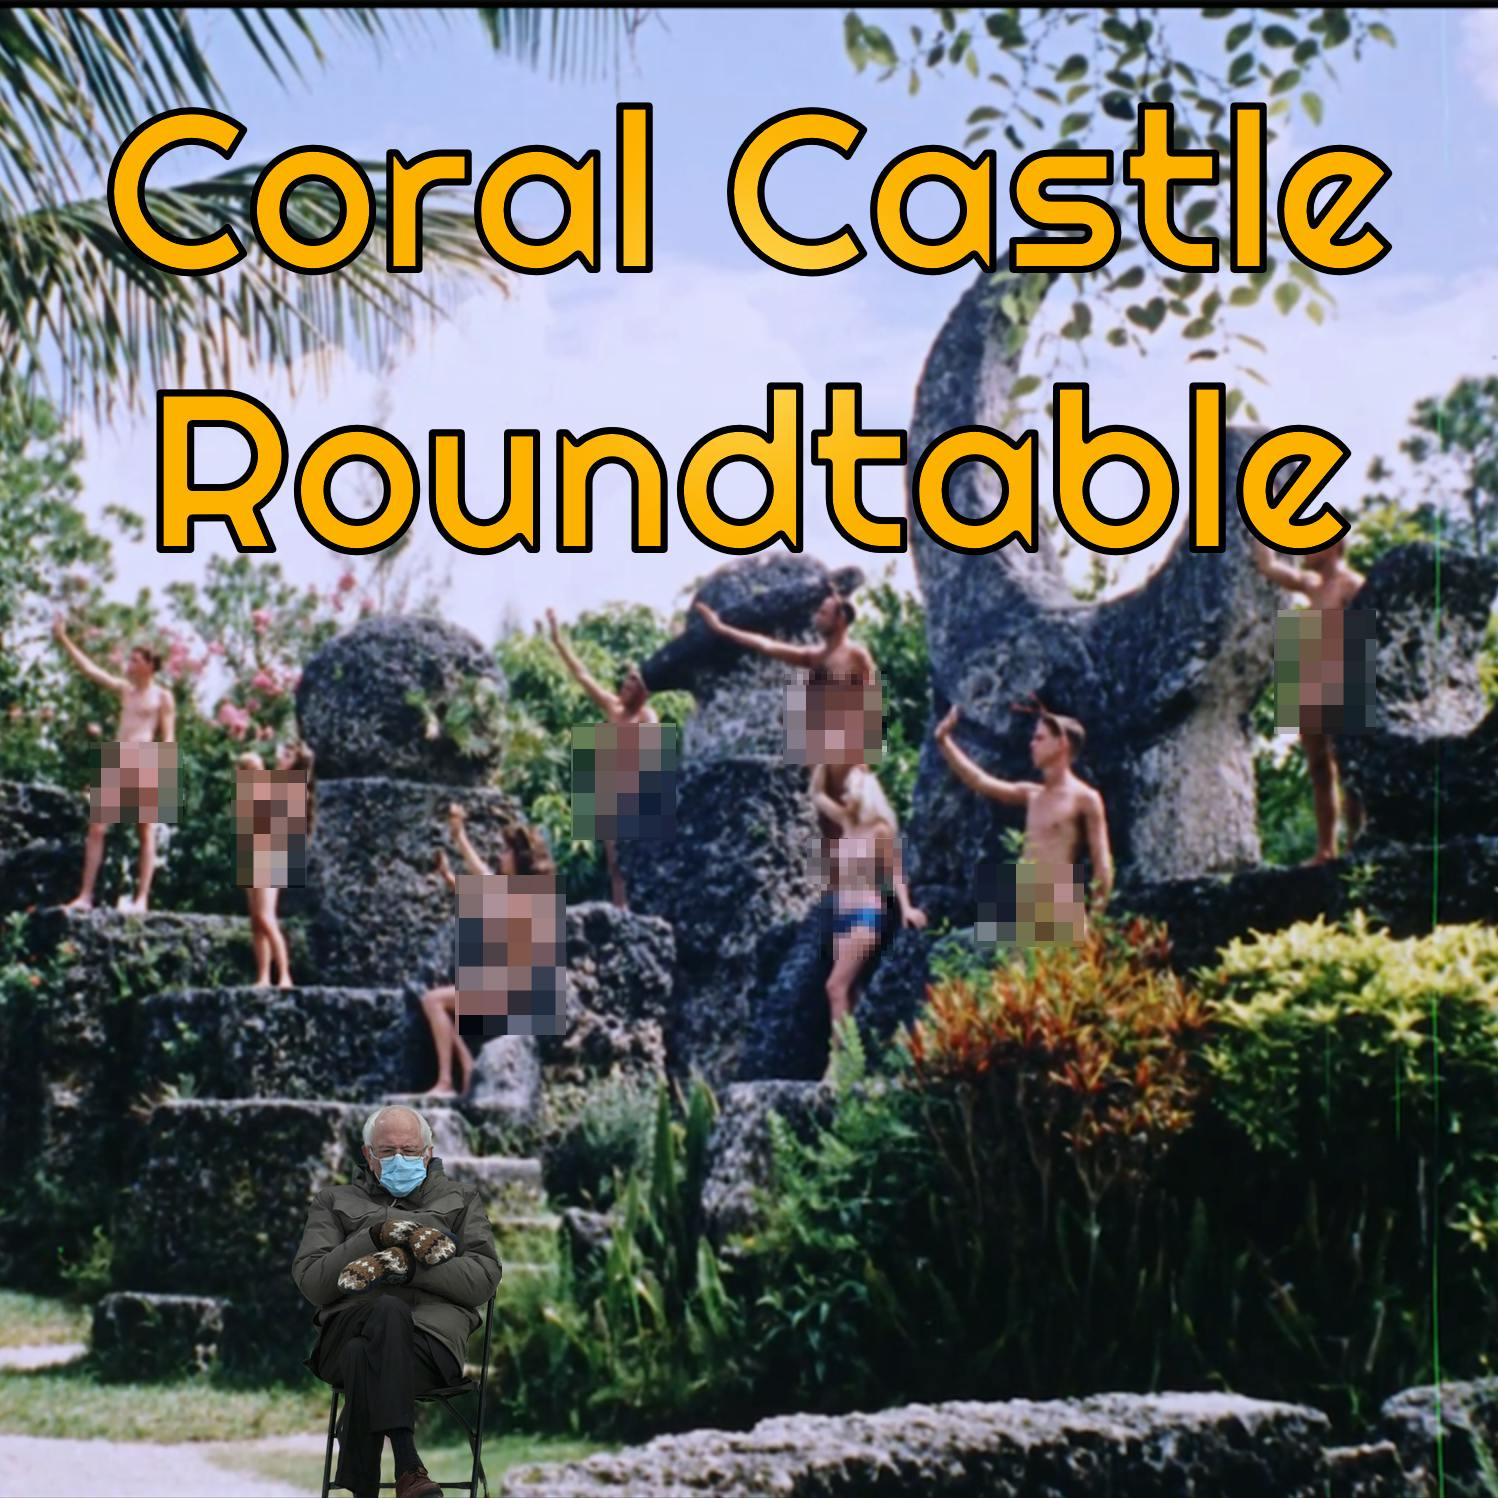 224 - Coral Castle Roundtable